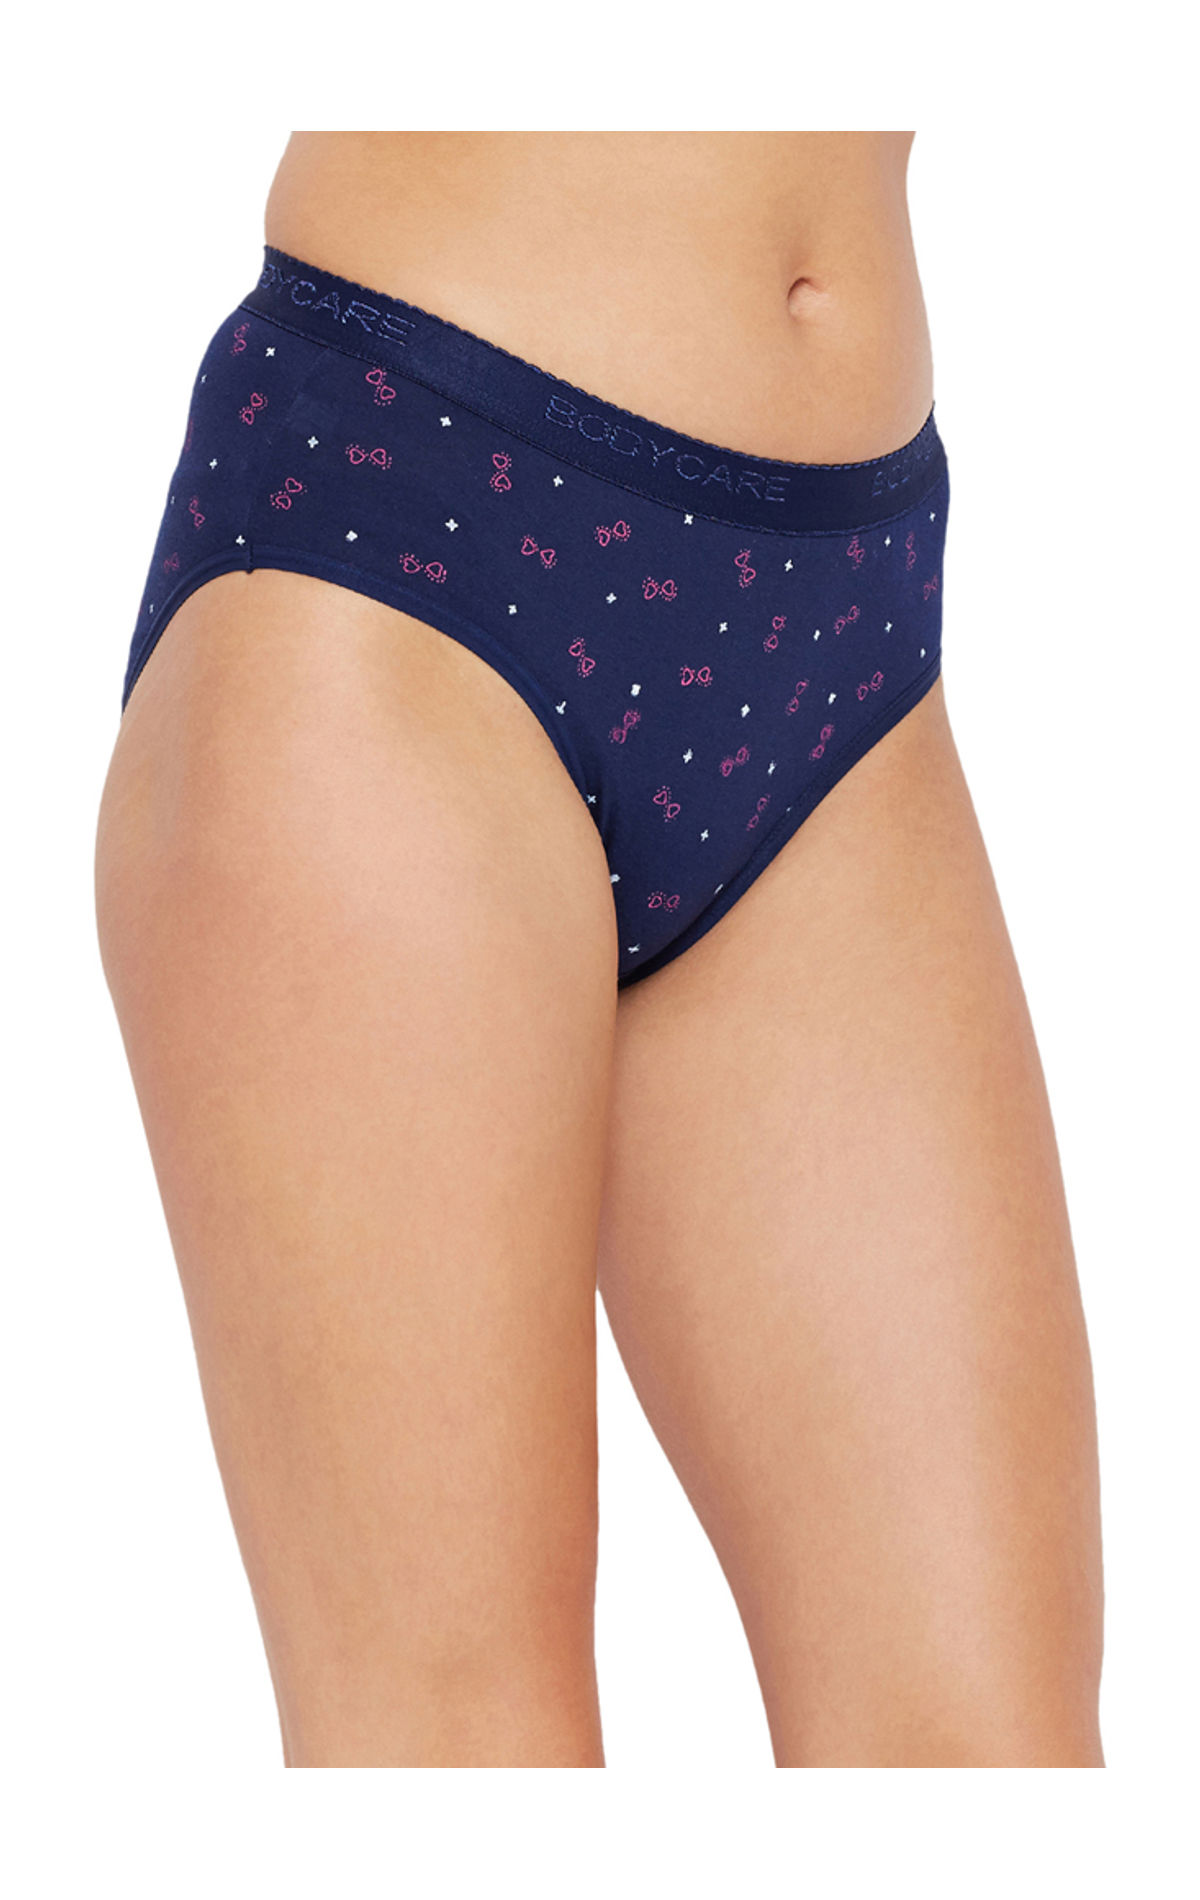 BODYCARE Pack of 3 Dark Printed High Cut Briefs in Assorted Color-5000